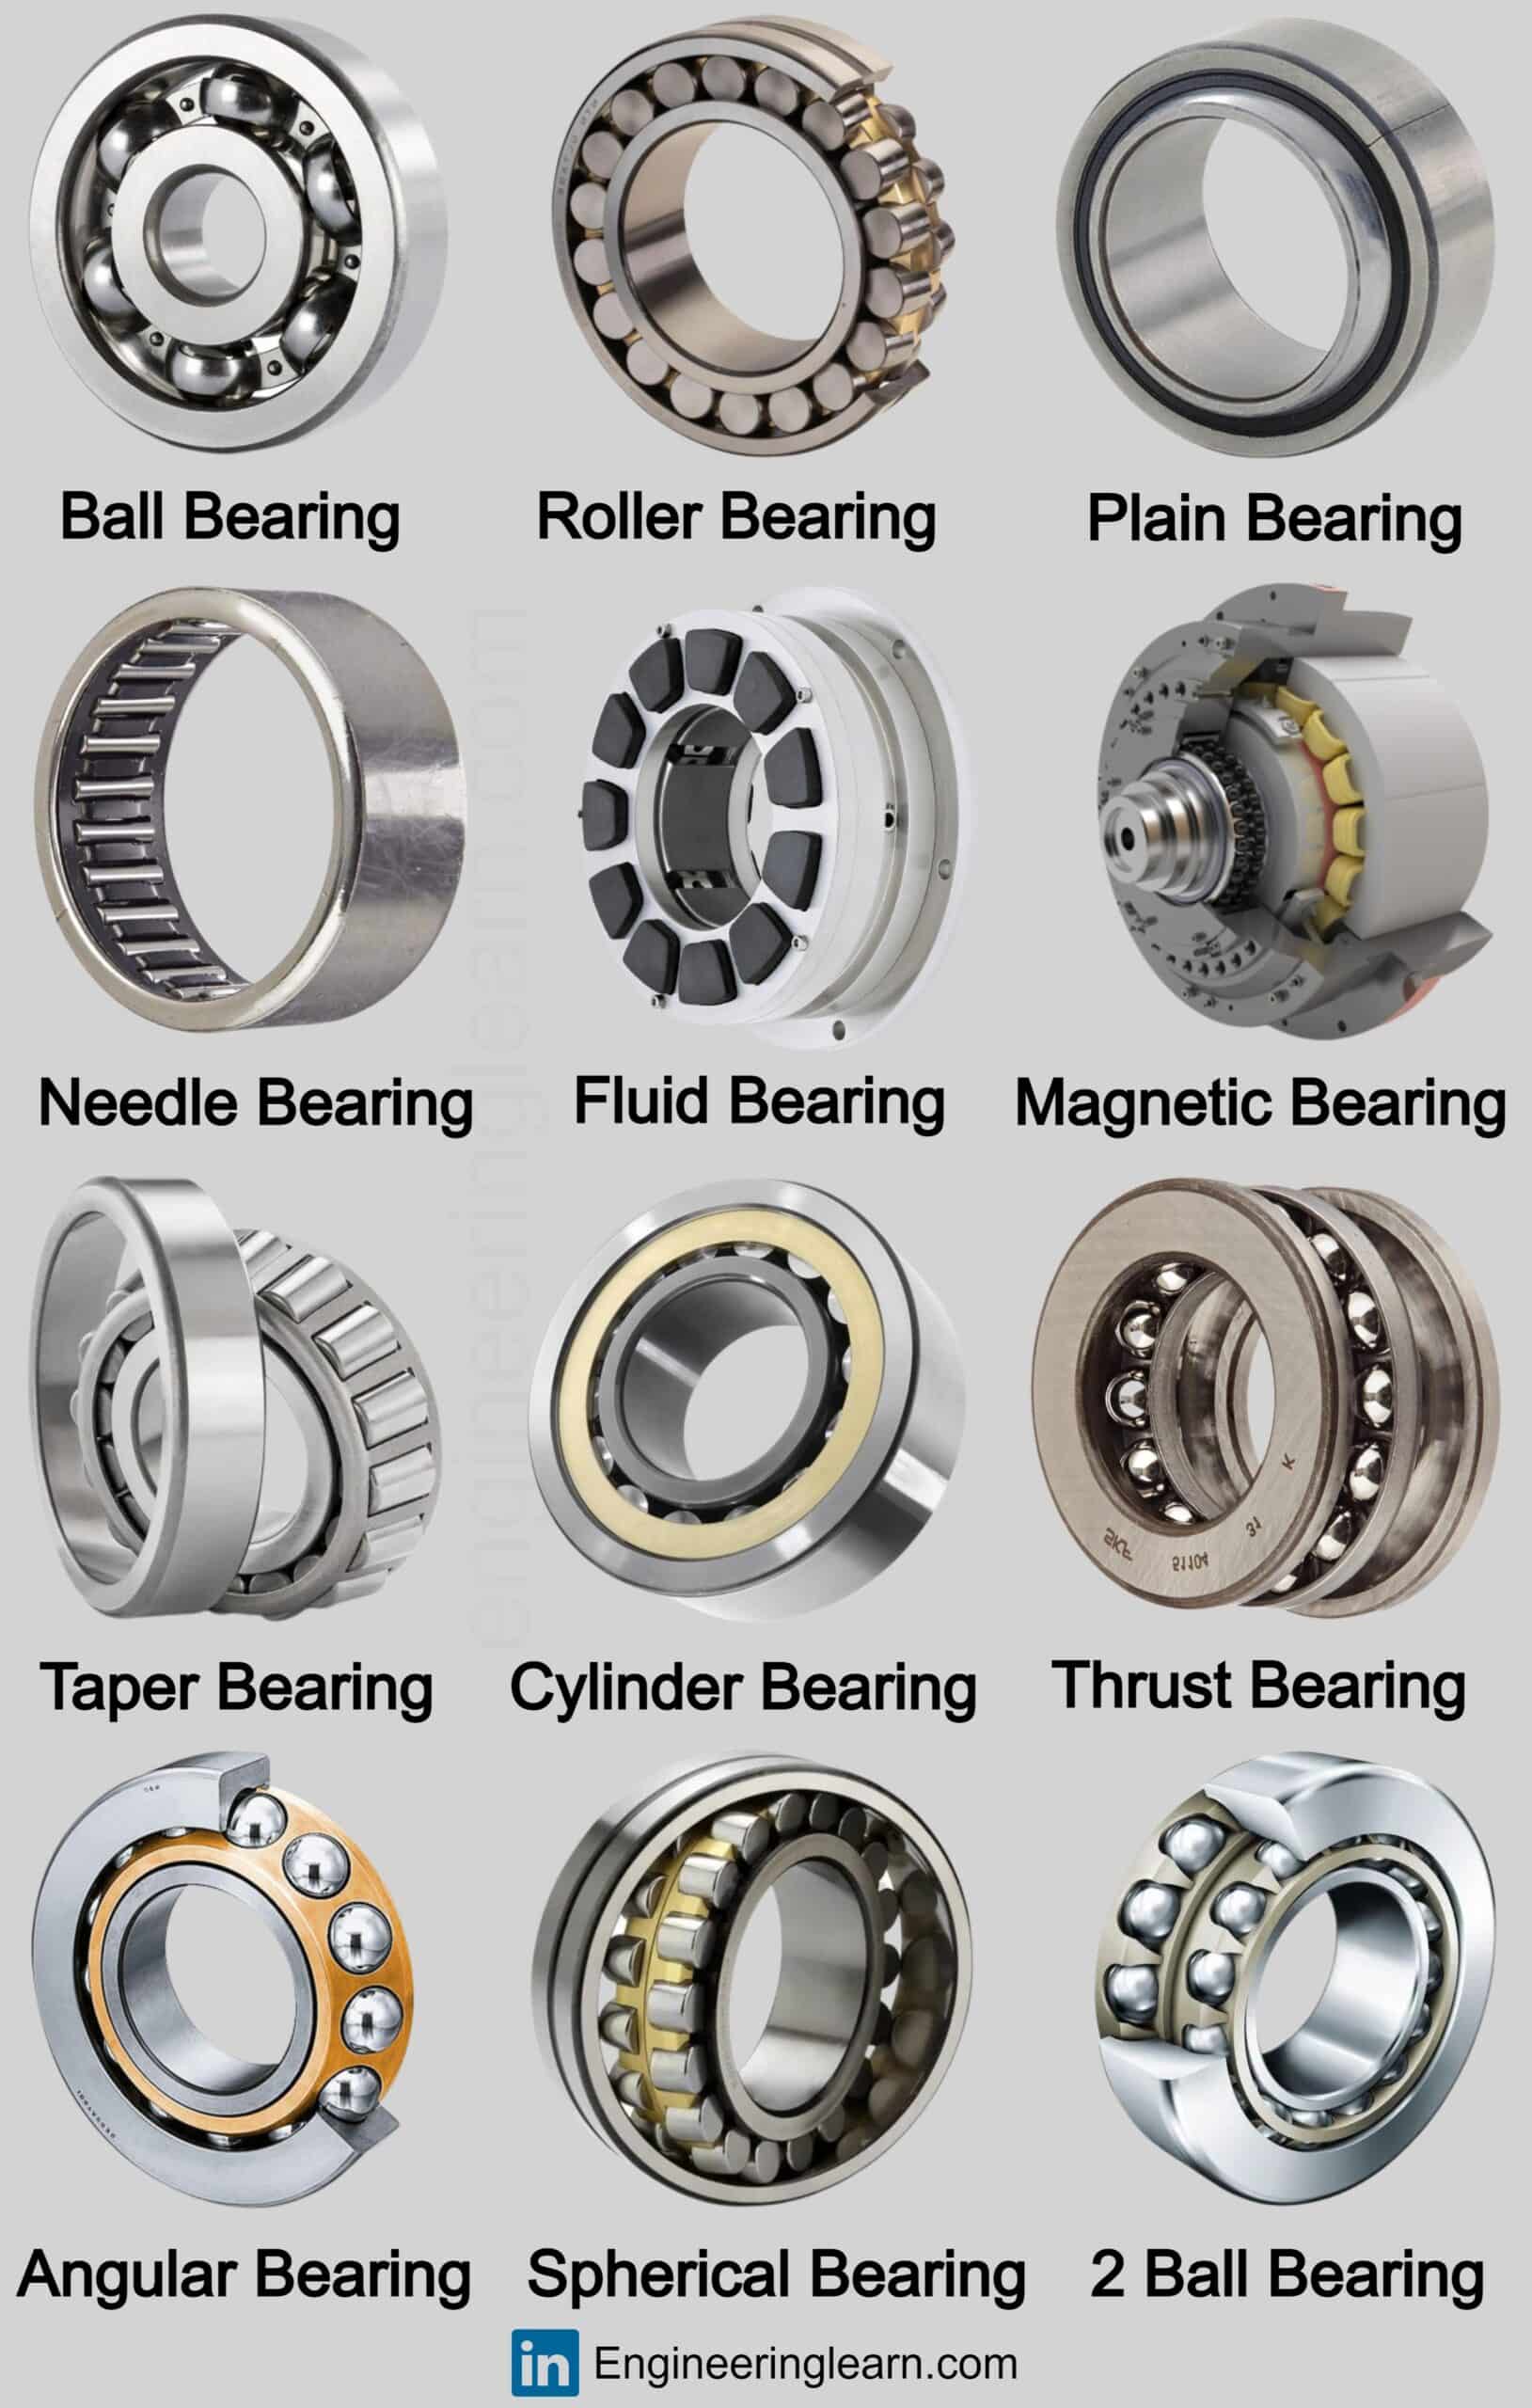 Types of Bearings Definition, Function, Uses, Advantages